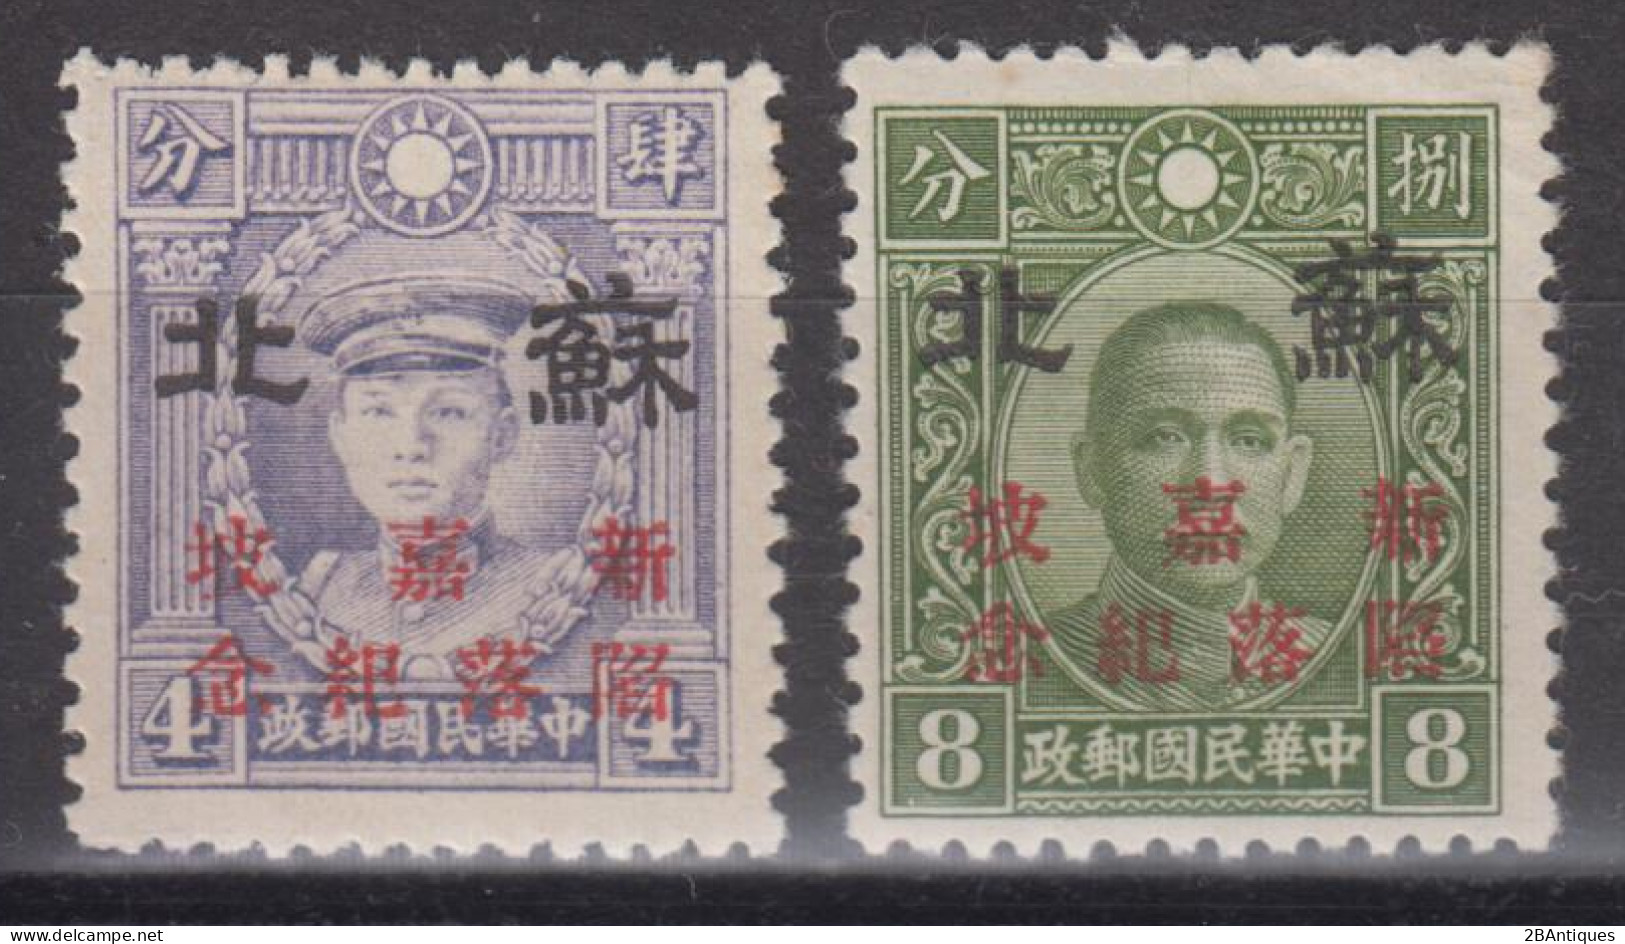 JAPANESE OCCUPATION OF CHINA 1942 - North China SUPEH OVERPRINT - The Fall Of Singapore MH* - 1941-45 Chine Du Nord